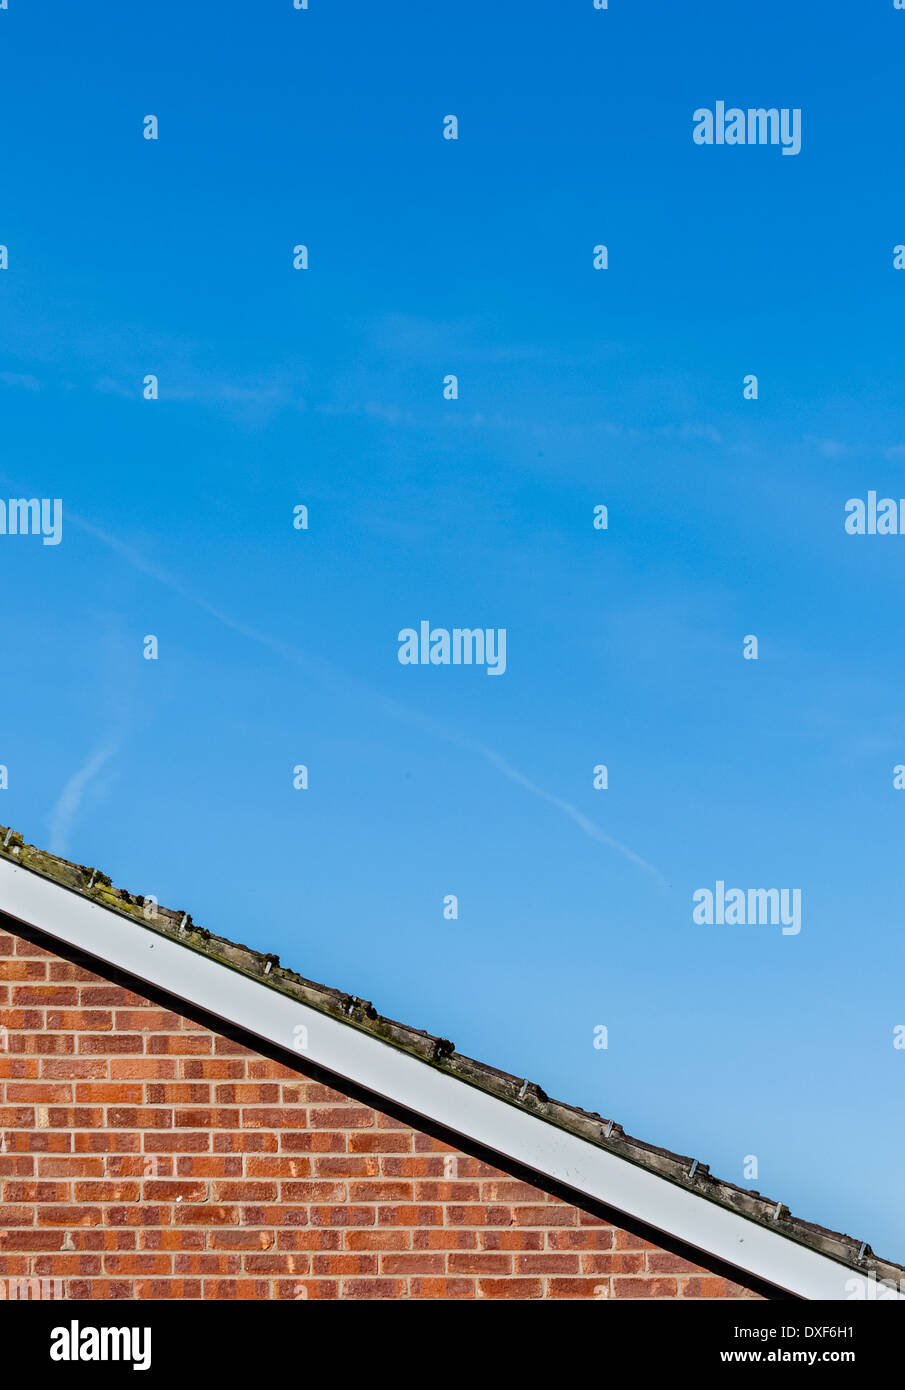 Edge of sloping tiled roof on top of red brick wall against mainly blue sky with hazy clouds. Stock Photo